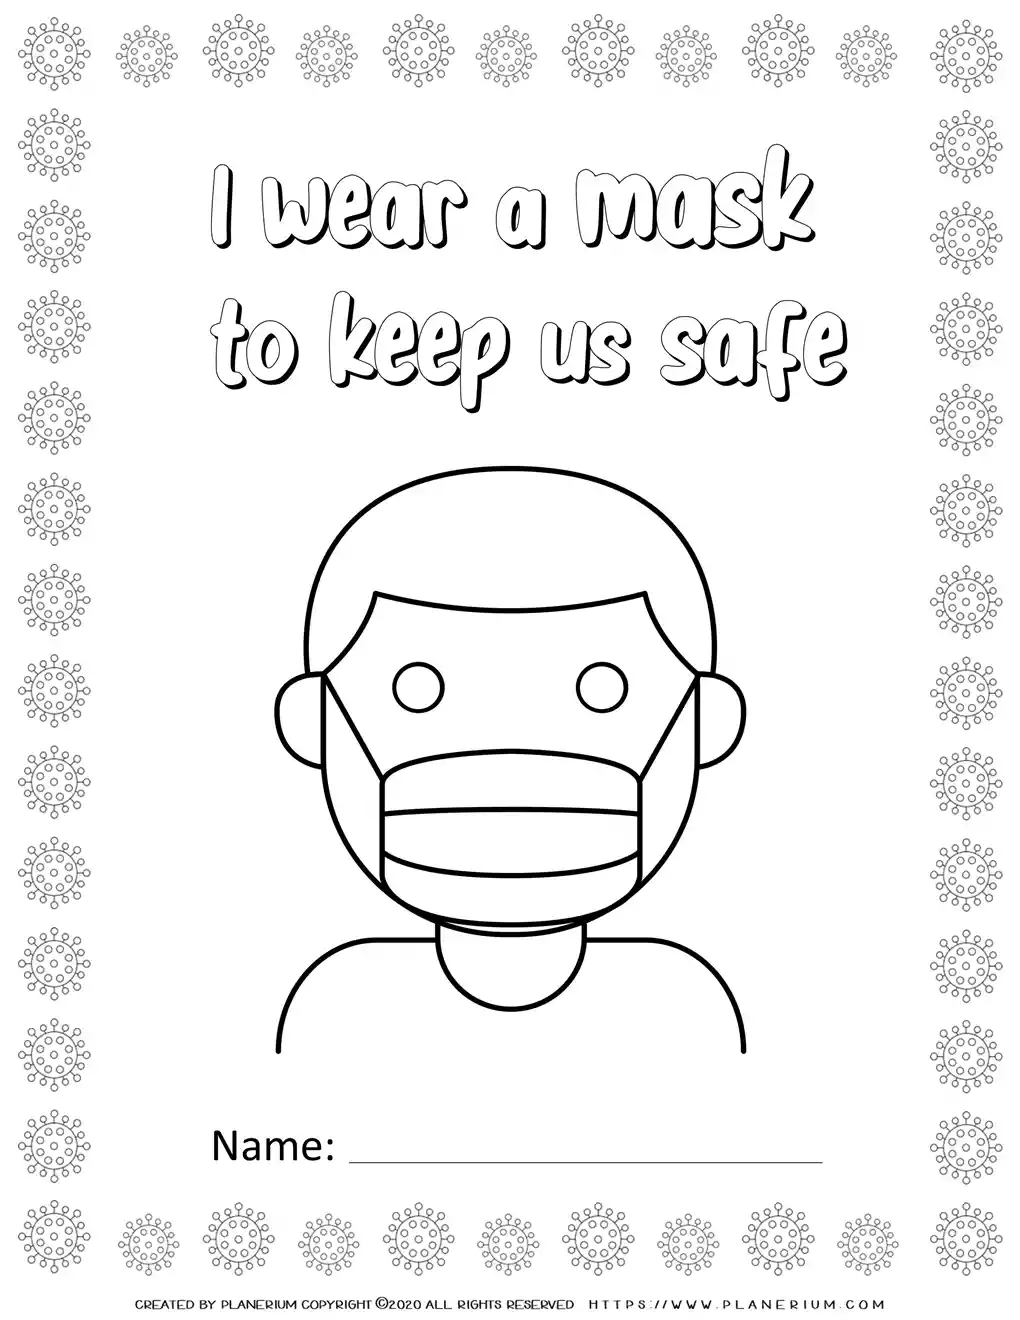 Keep Us Safe - Boy wear a Mask - Coloring Page | Planerium